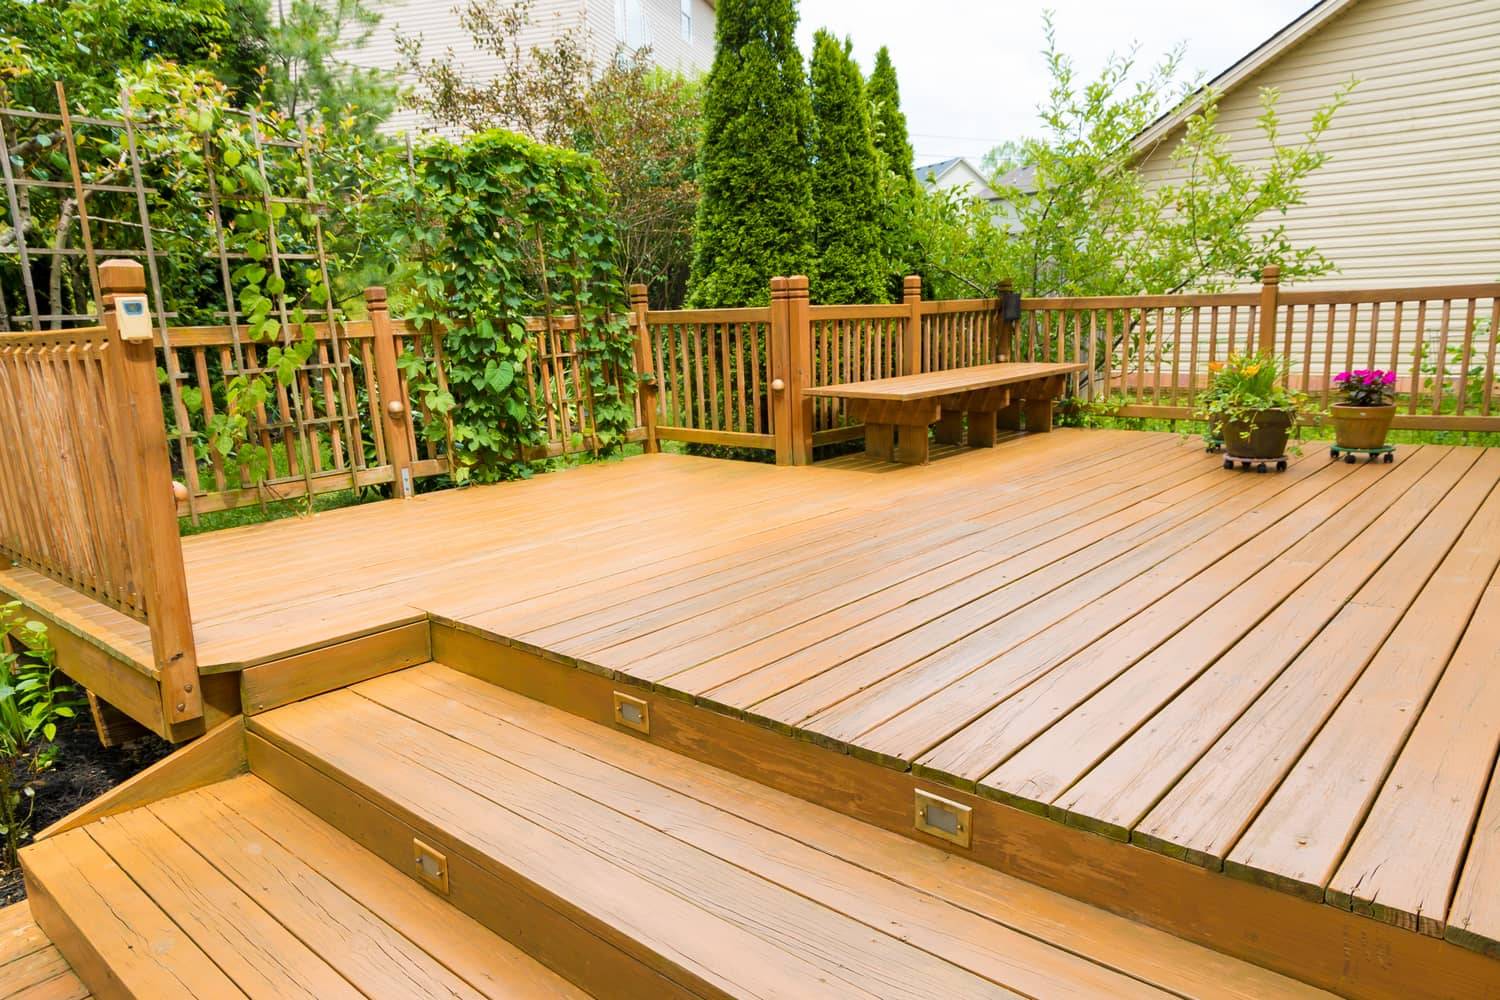 This picture is of a large wooden deck with a bench next to a garden.